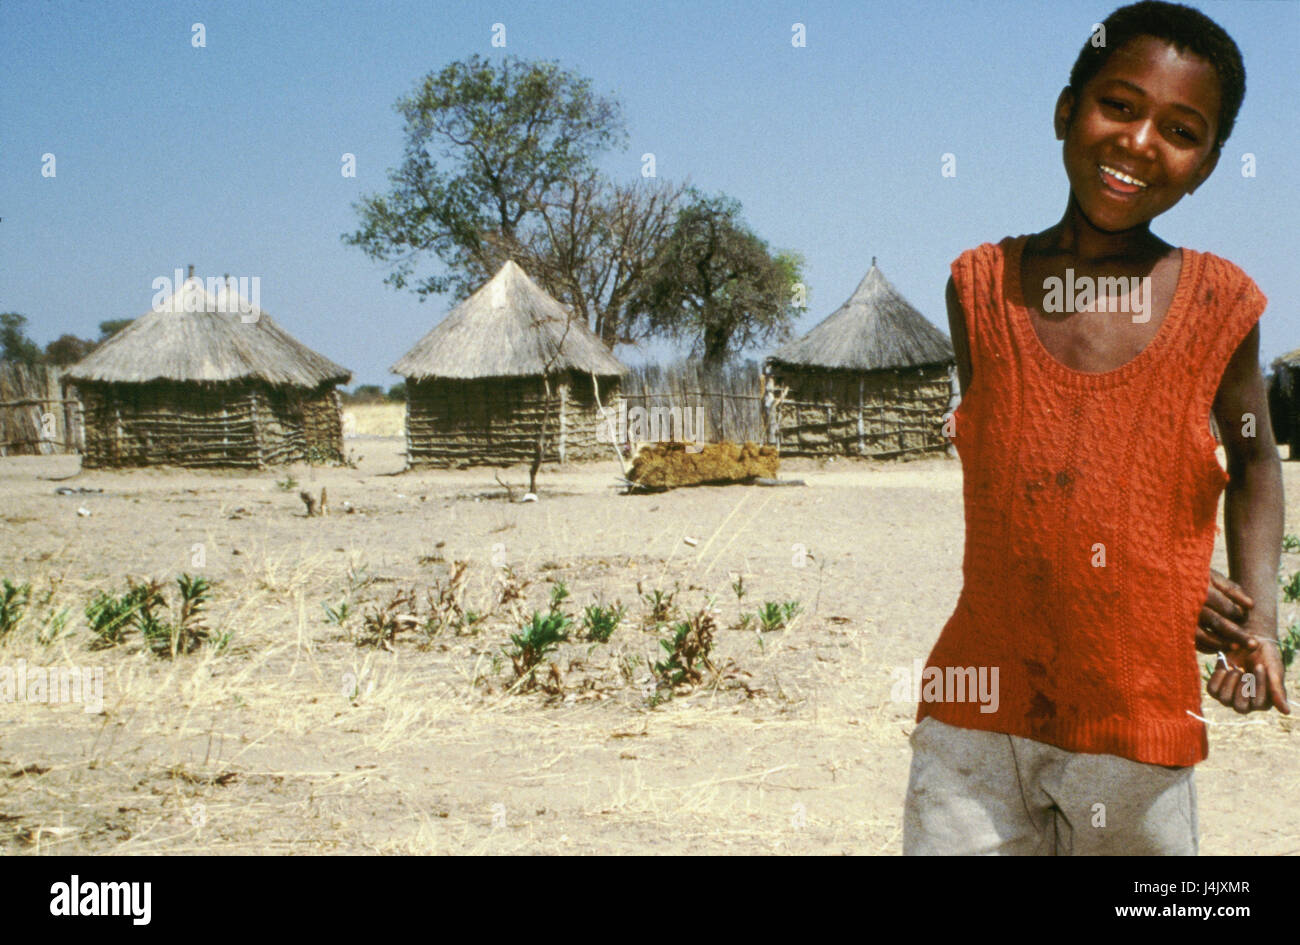 Namibia, Caprivi, village, boy, non-white, smile no model release outside, Africa, South-West Africa, Caprivi cusp, steelworks, wooden hut, houses, residential houses, residential steelworks, child, African, 9 years, happily, friendly Stock Photo